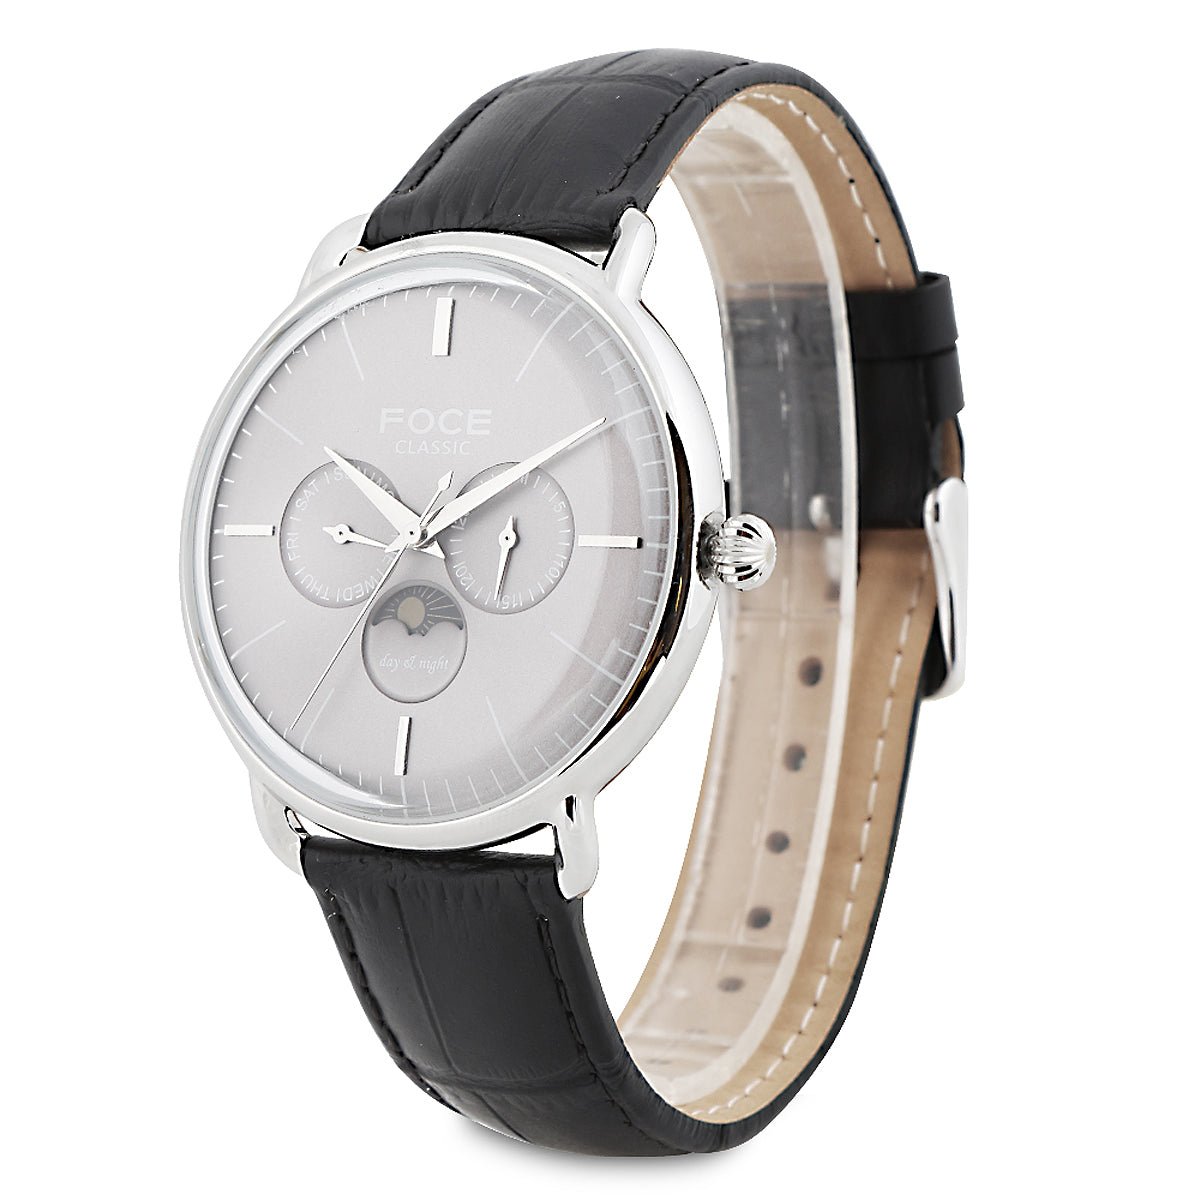 FOCE Multifunction Moonphase White Dial Leather Strap Watch For Men-FC12SSL-Grey